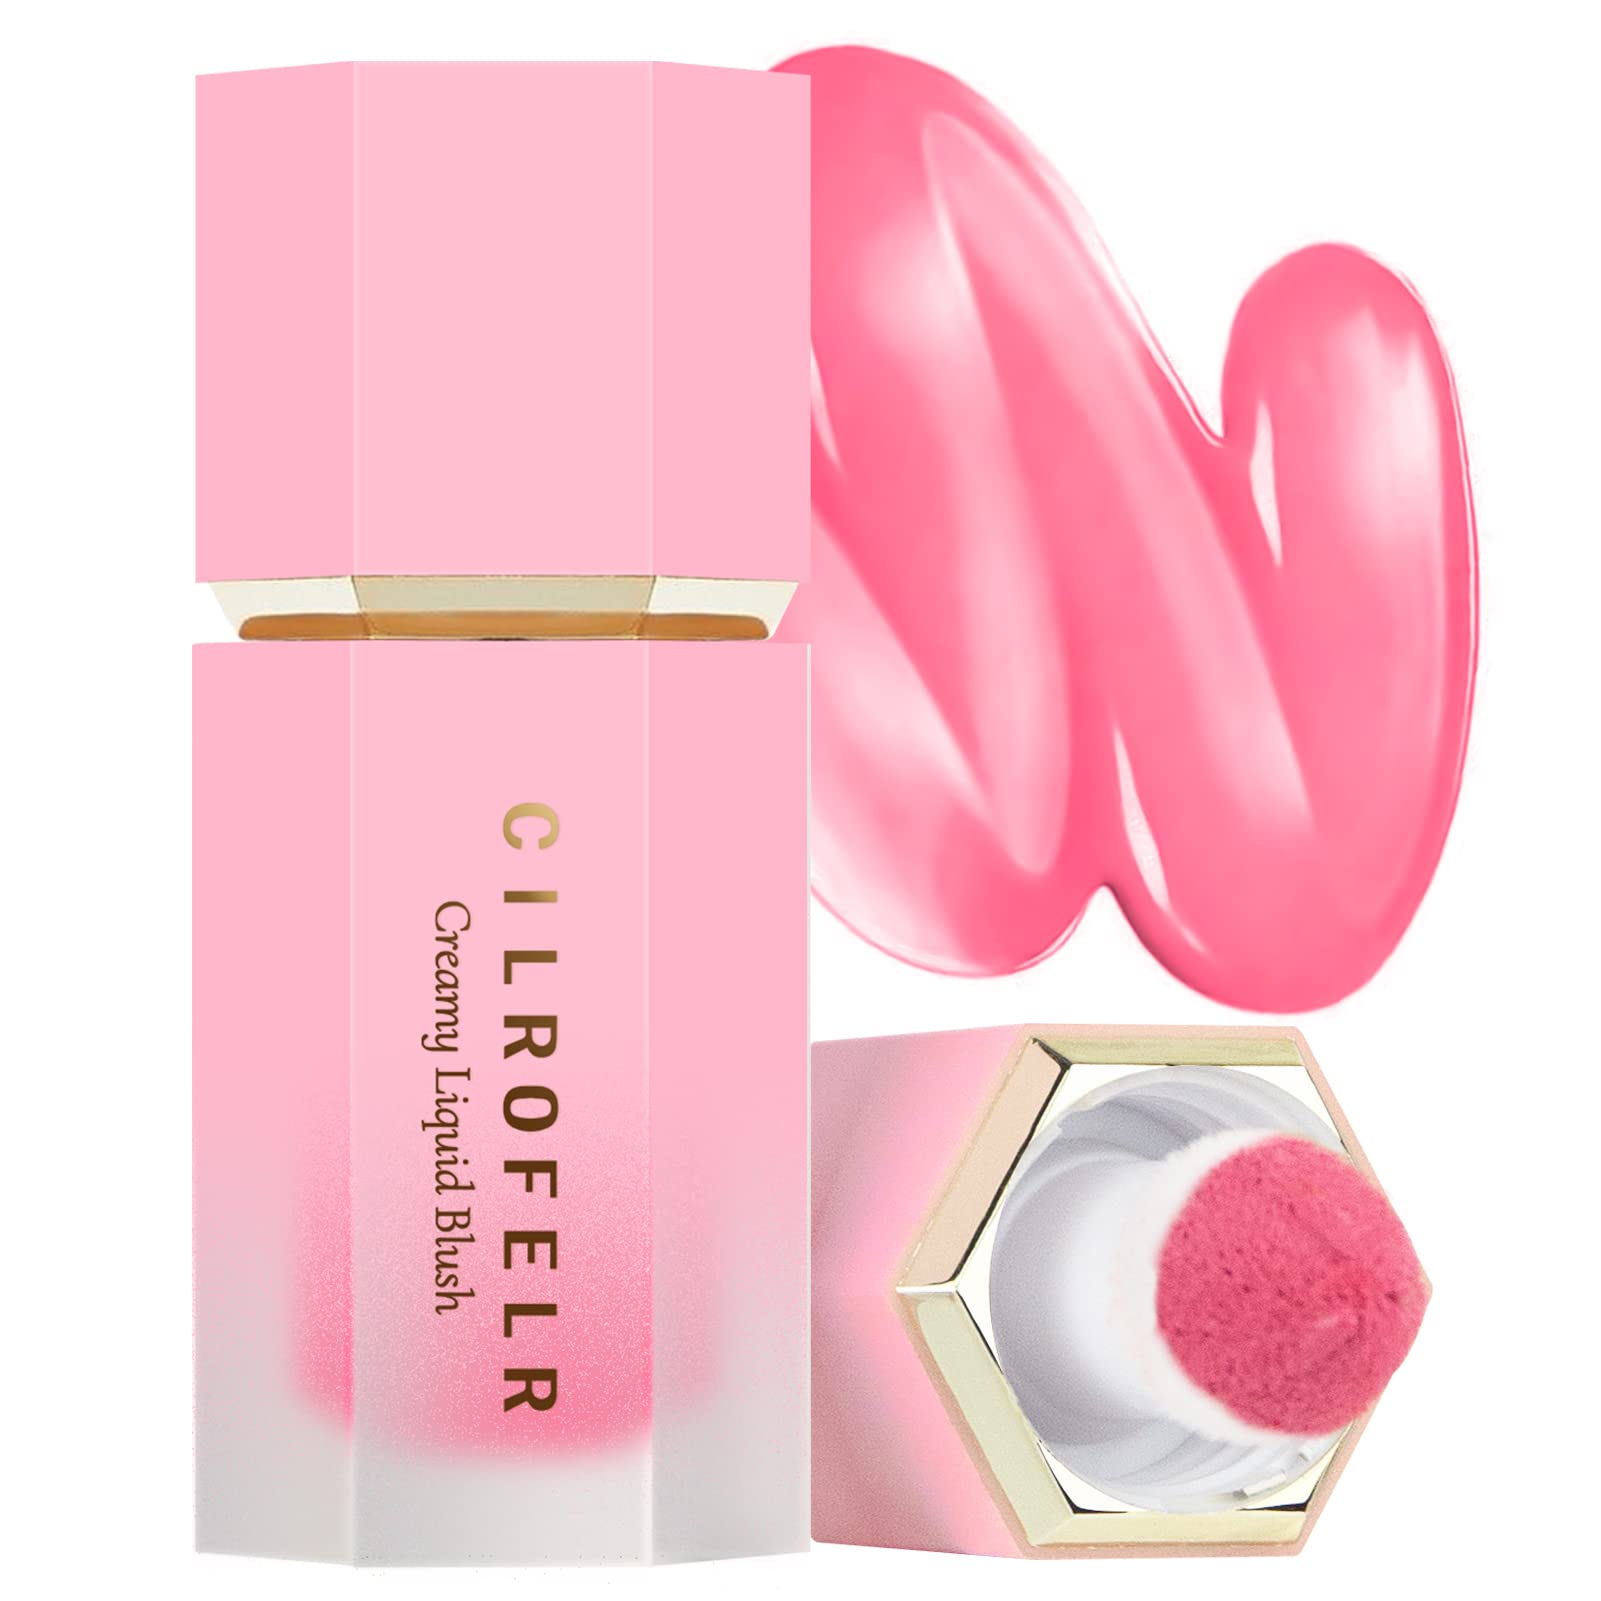 Cilrofelr Soft Cream Liquid Blush, Creamy Blush Makeup for Cheek, Dewy Finish, Buildable Pigment, Lightweight, Long Lasting, For Natural-looking Flush & Everyday Wear - Alluring (0.22 fl. oz.)